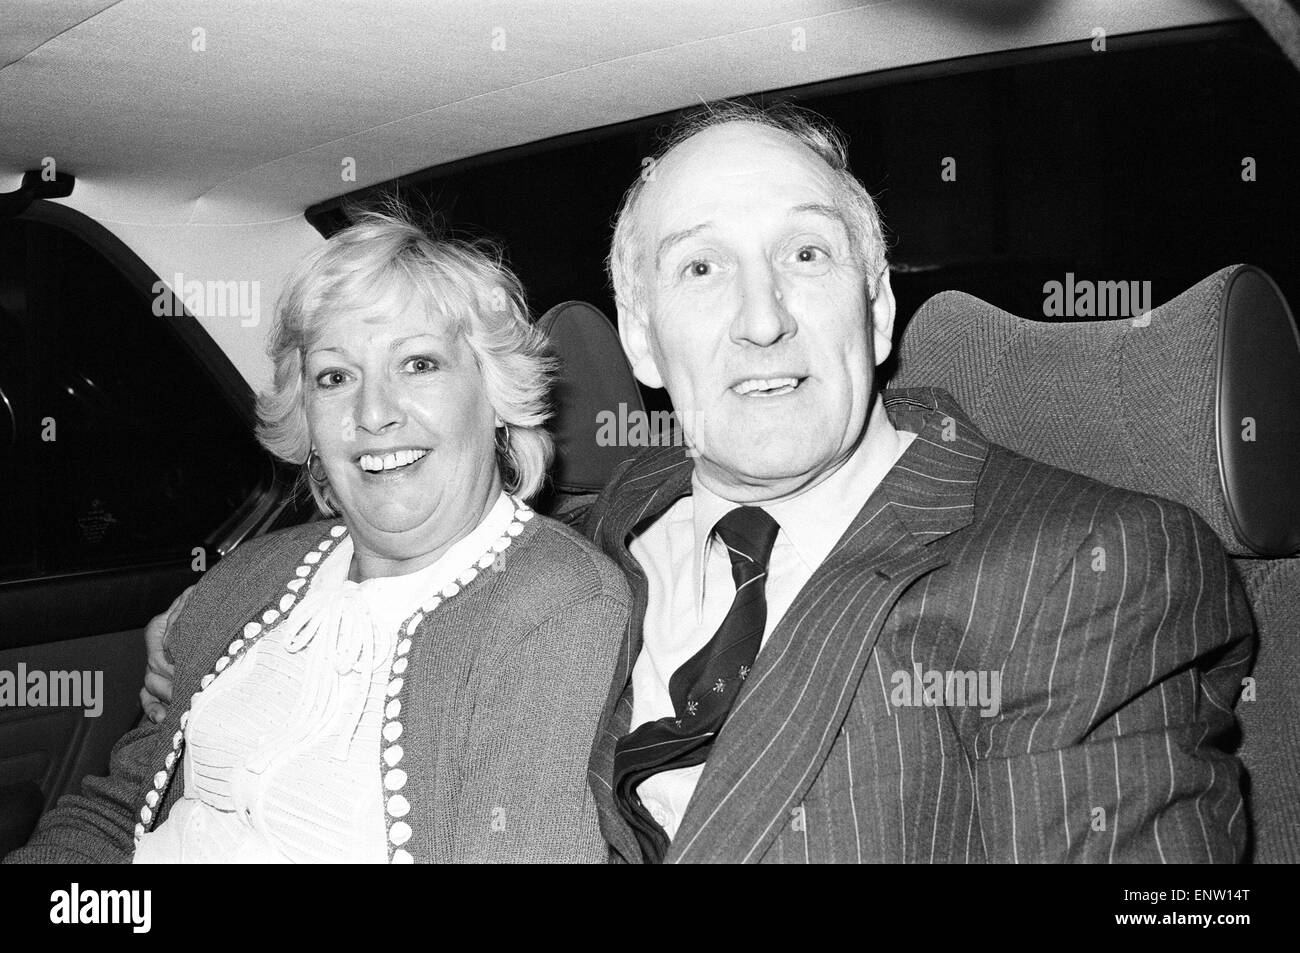 Thomas Wisbey and wife, March 1982. Thomas Wisbey and wife Rennee, pictured leaving the Old Bailey in London, March 1982. The Great Train Robber walked to freedom after being fined £500 for his part in another train crime. In 1965 he was jailed for 30 years for his part in the great £2,750,000 raid. But the Old Bailey judge told Wisbey, who was paroled in 1976, that his latest offence, handling travelers cheques stolen from mail trains by a gang, was 'not of the gravest'. Stock Photo